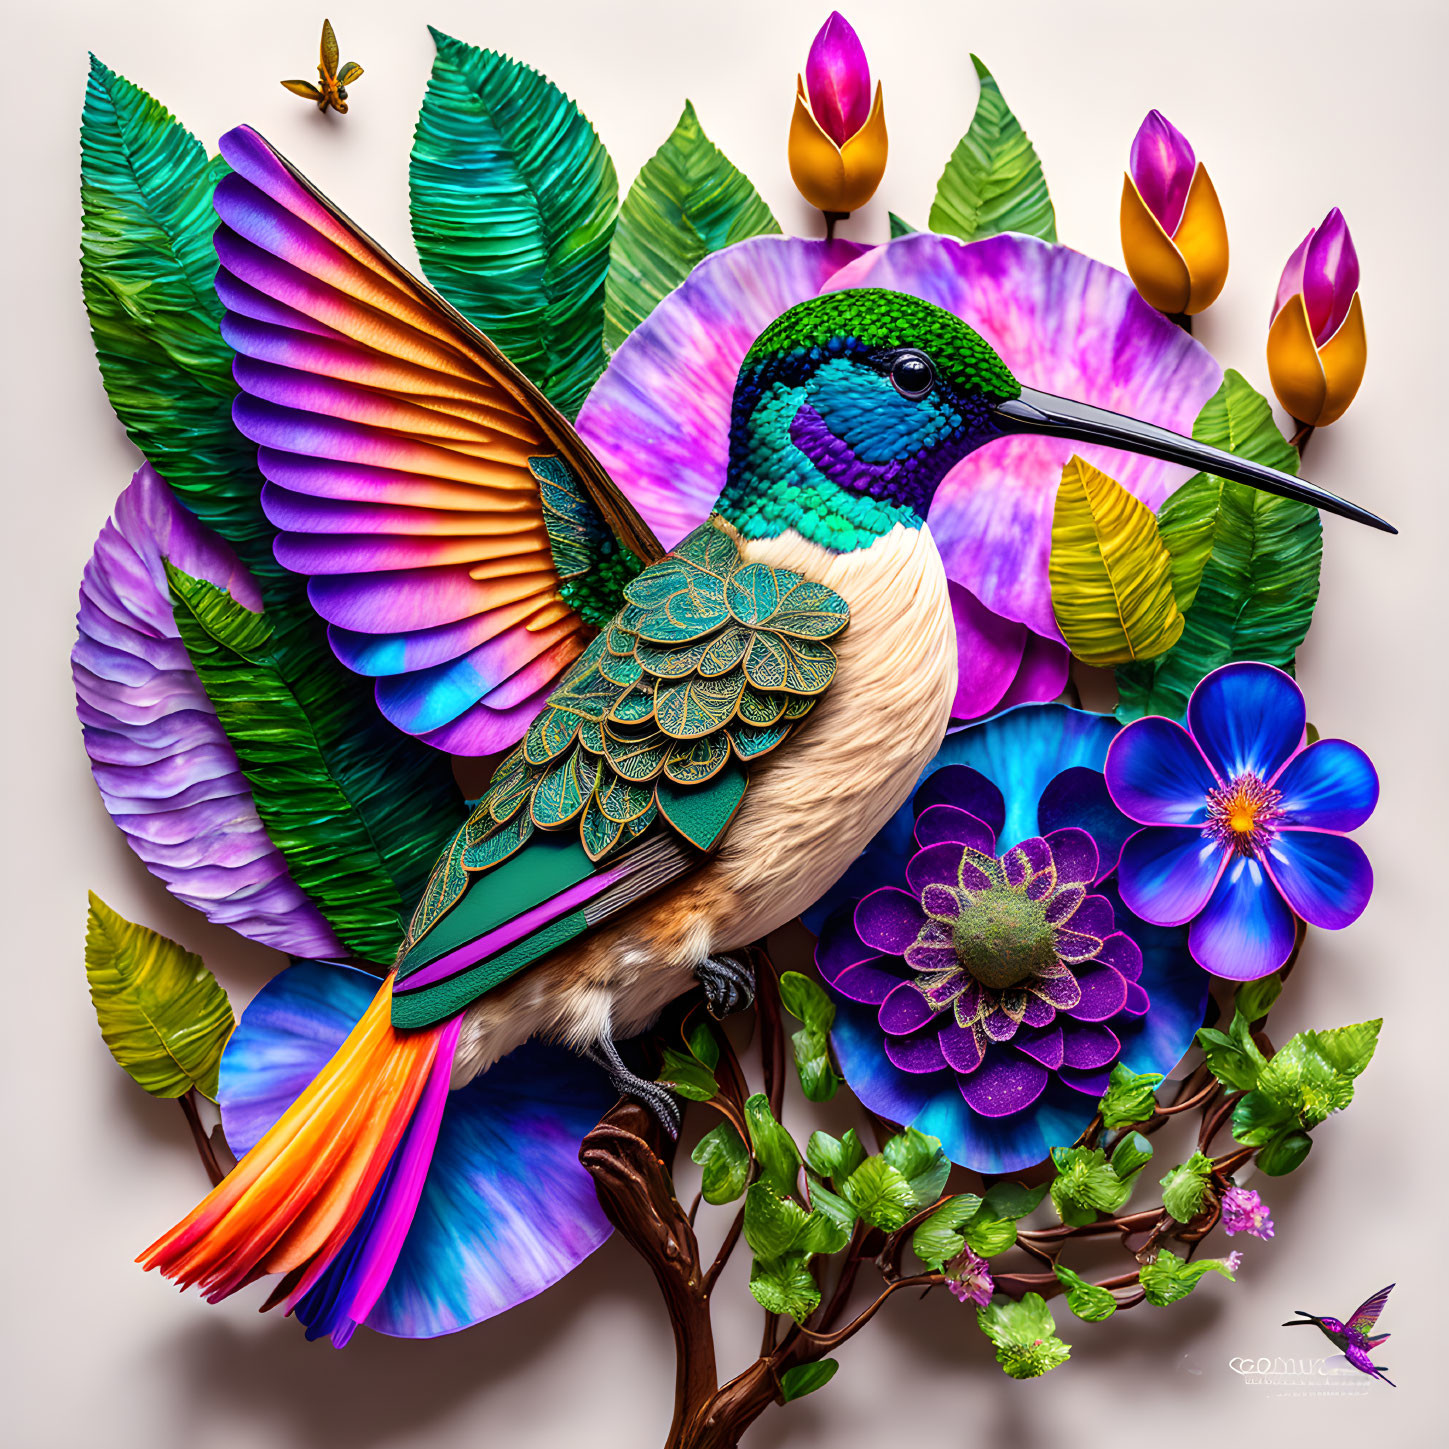 Colorful hummingbird surrounded by vibrant flowers and insects